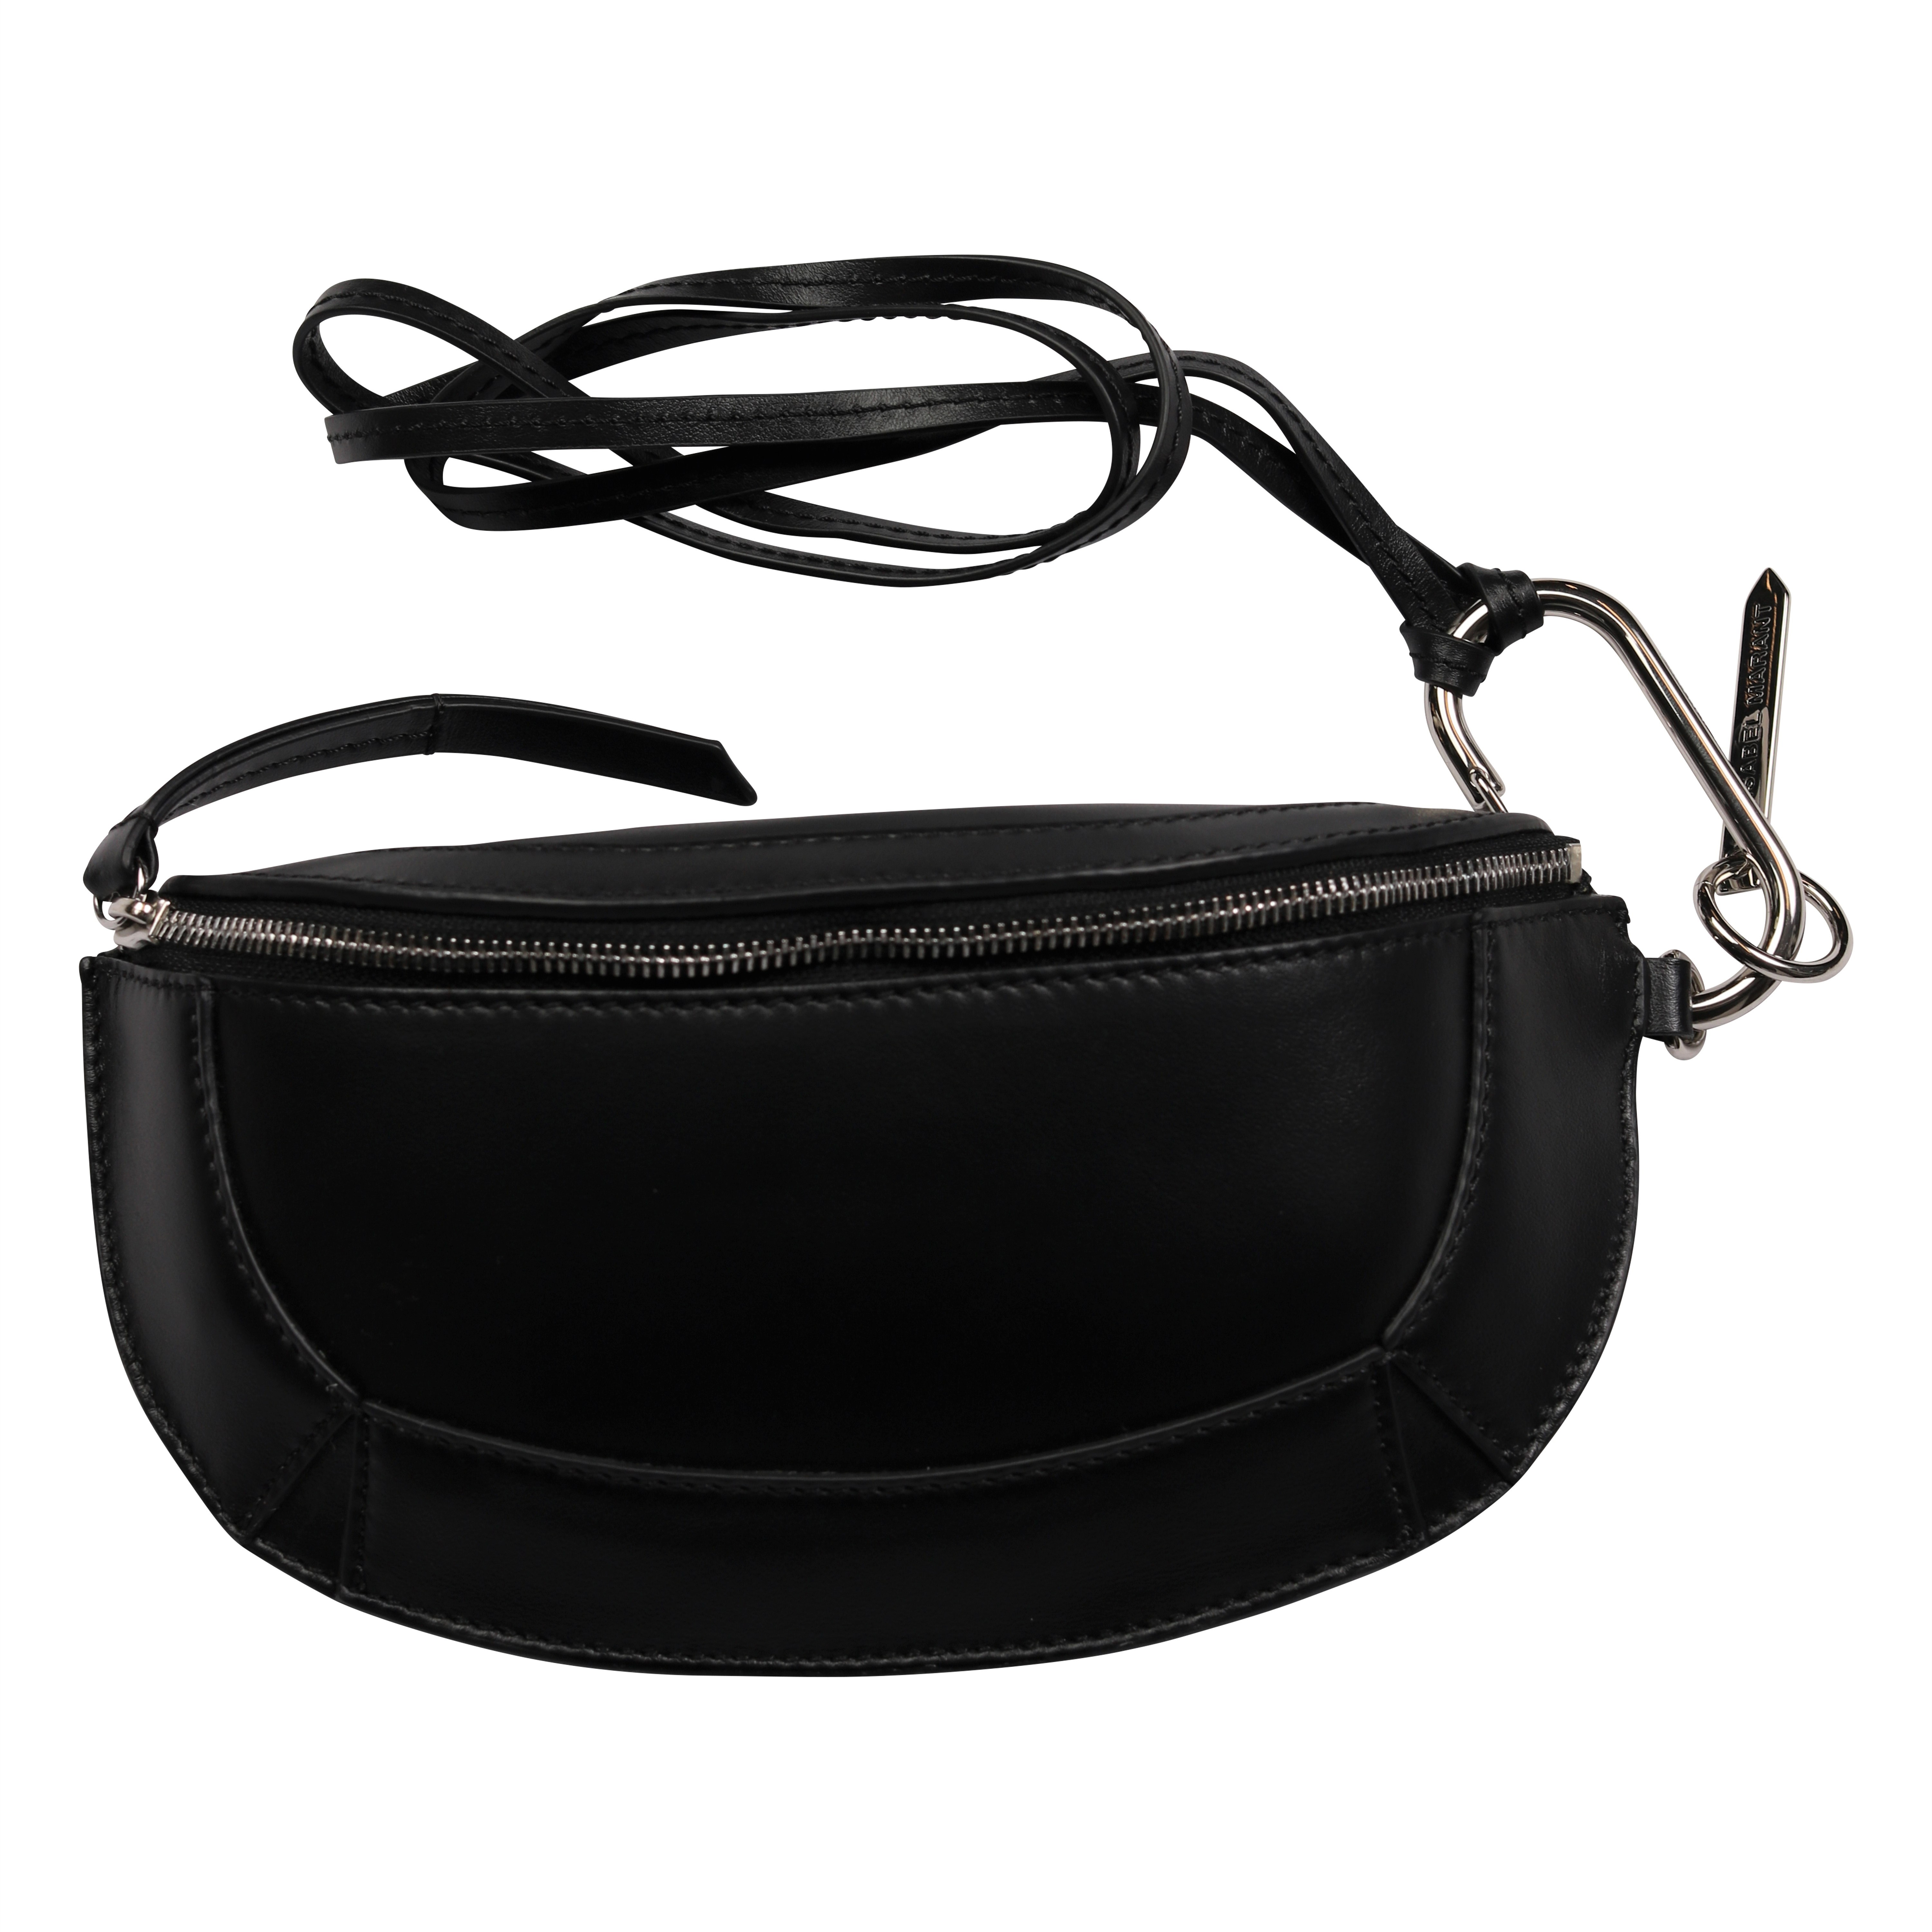 Isabel Marant Bossey Small Leather Bag in Black